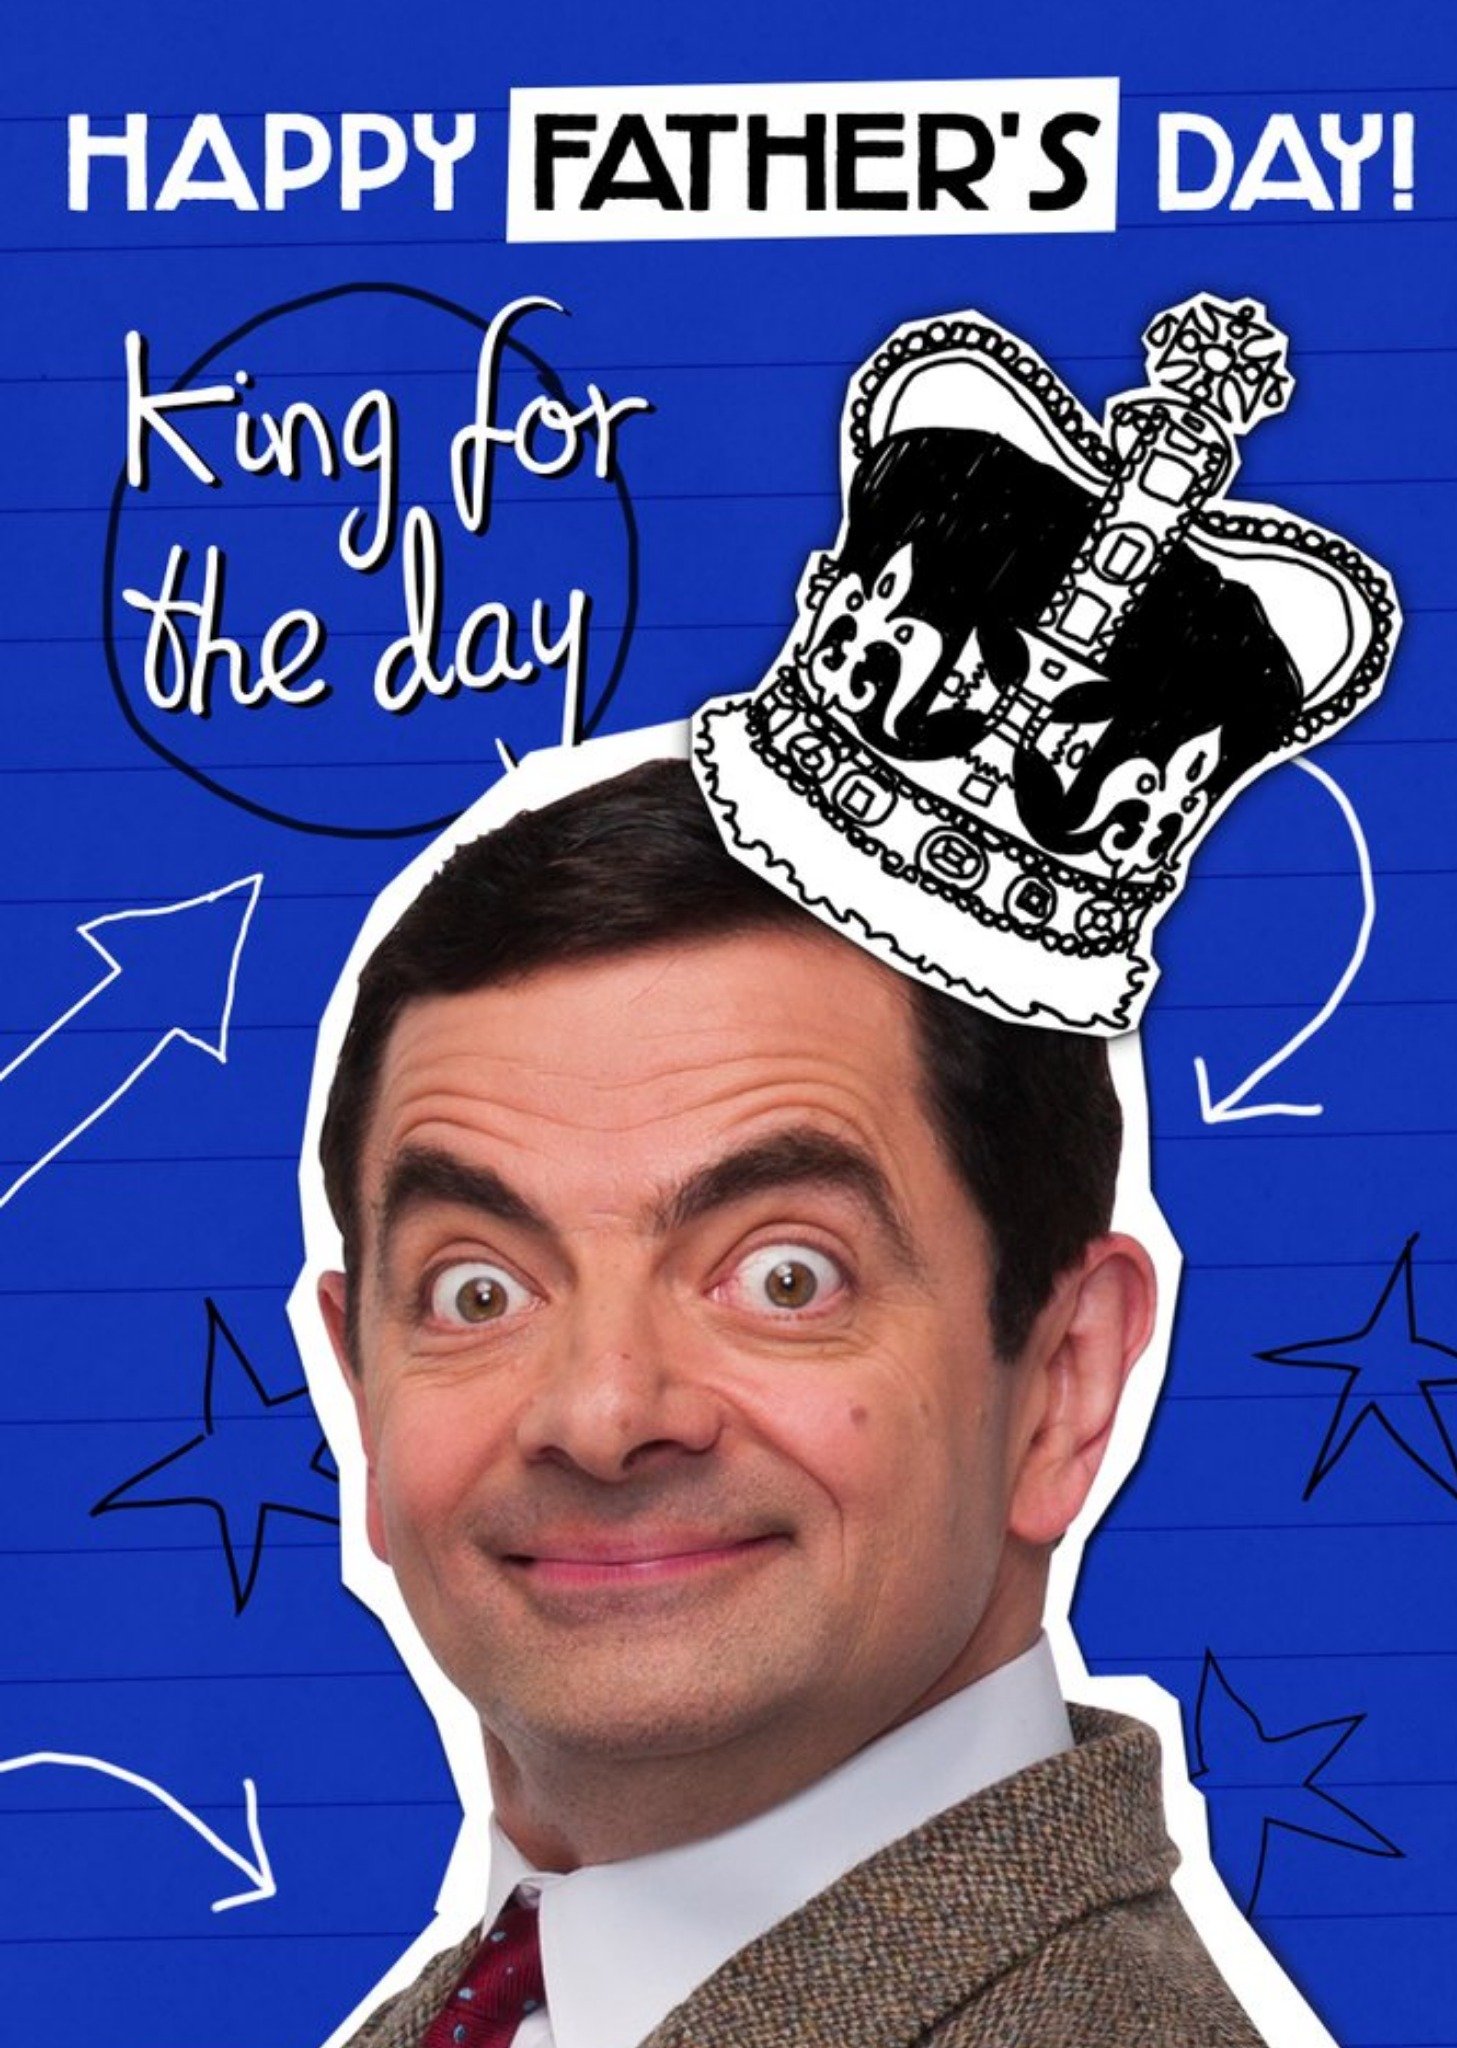 Moonpig Funny Mr Bean King For The Day Father's Day Card Ecard